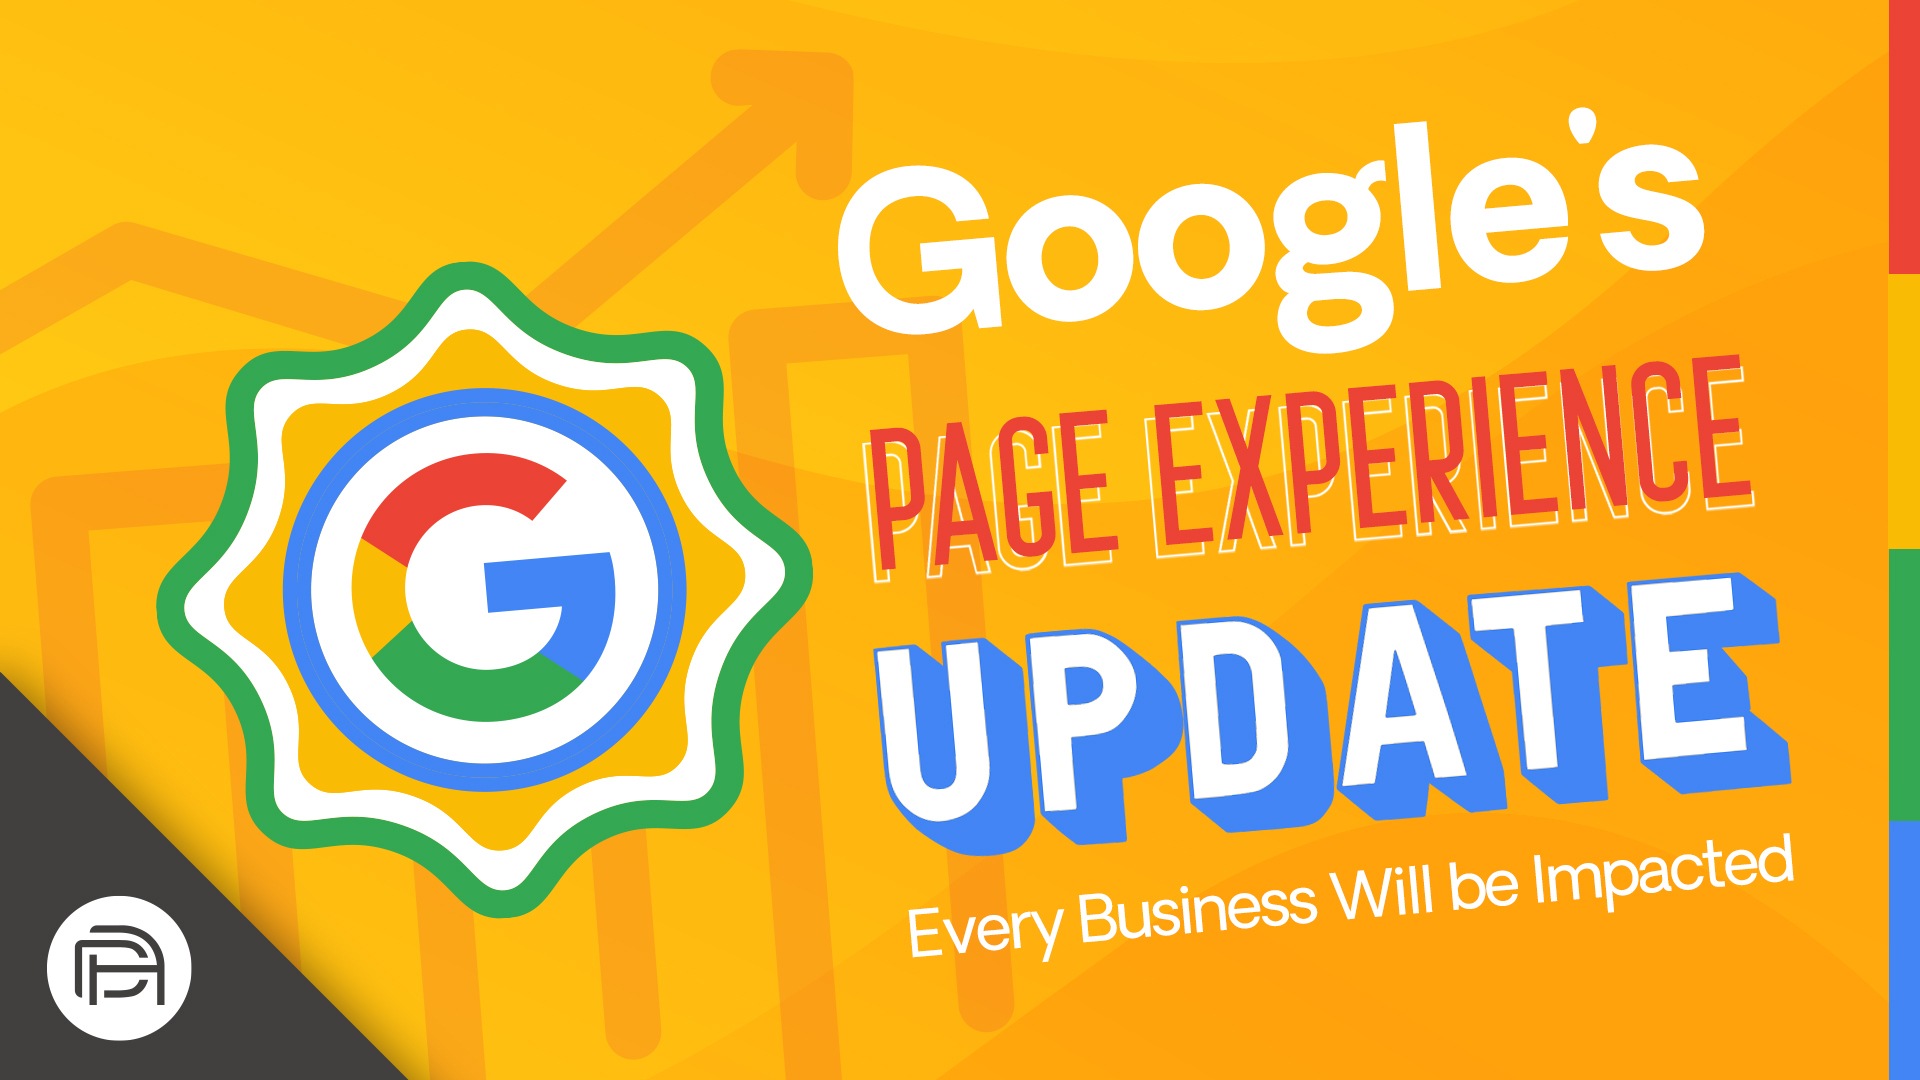 Google’s Page Experience Algorithm Update: Every Business is Impacted